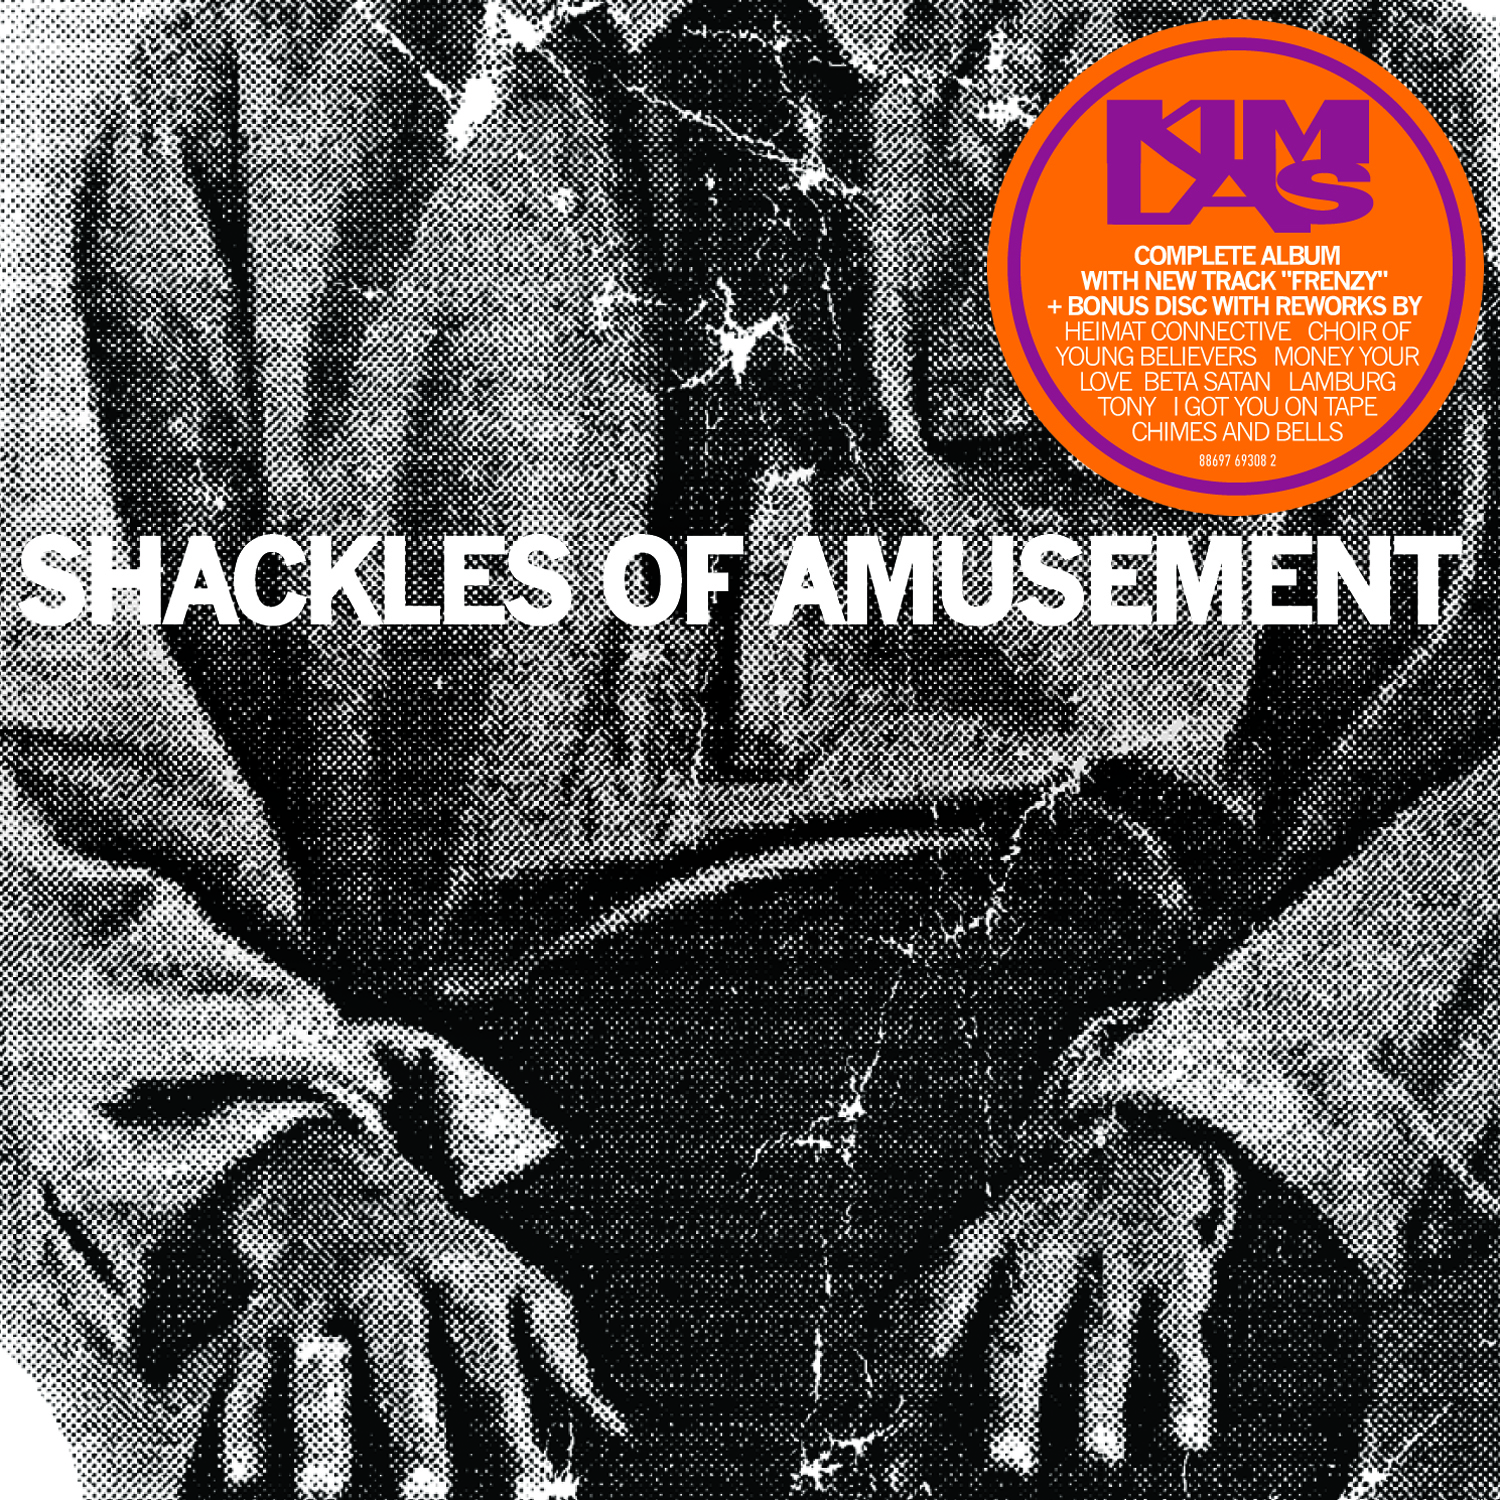 The Shackles Of Amusement / Three Times Rediscovered - Kim Las